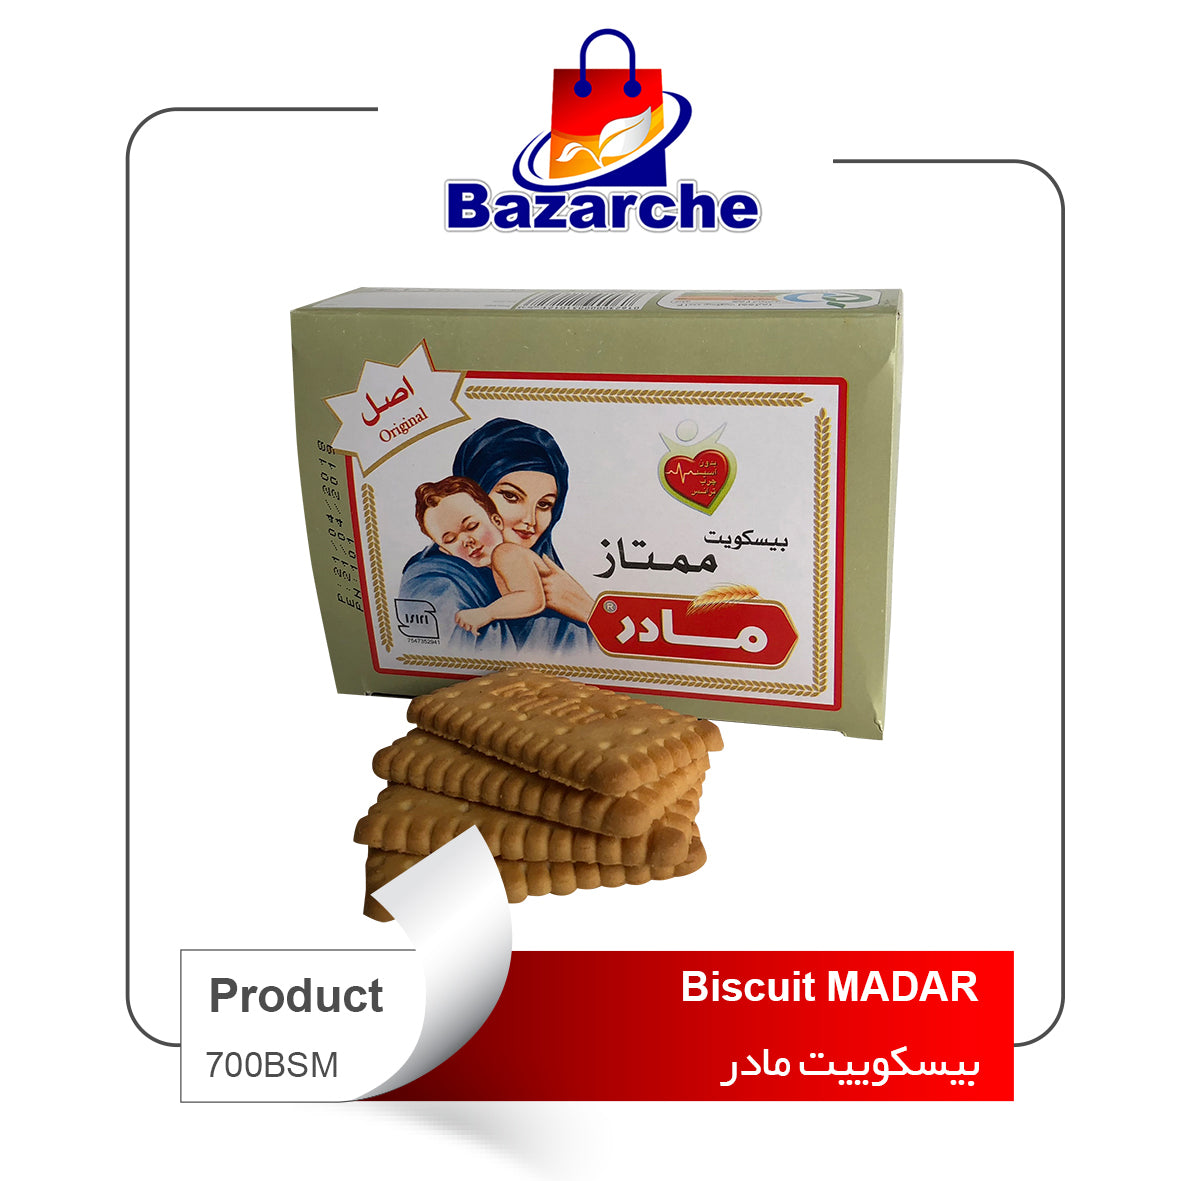 Biscuit MADAR(بیسکوییت مادر)